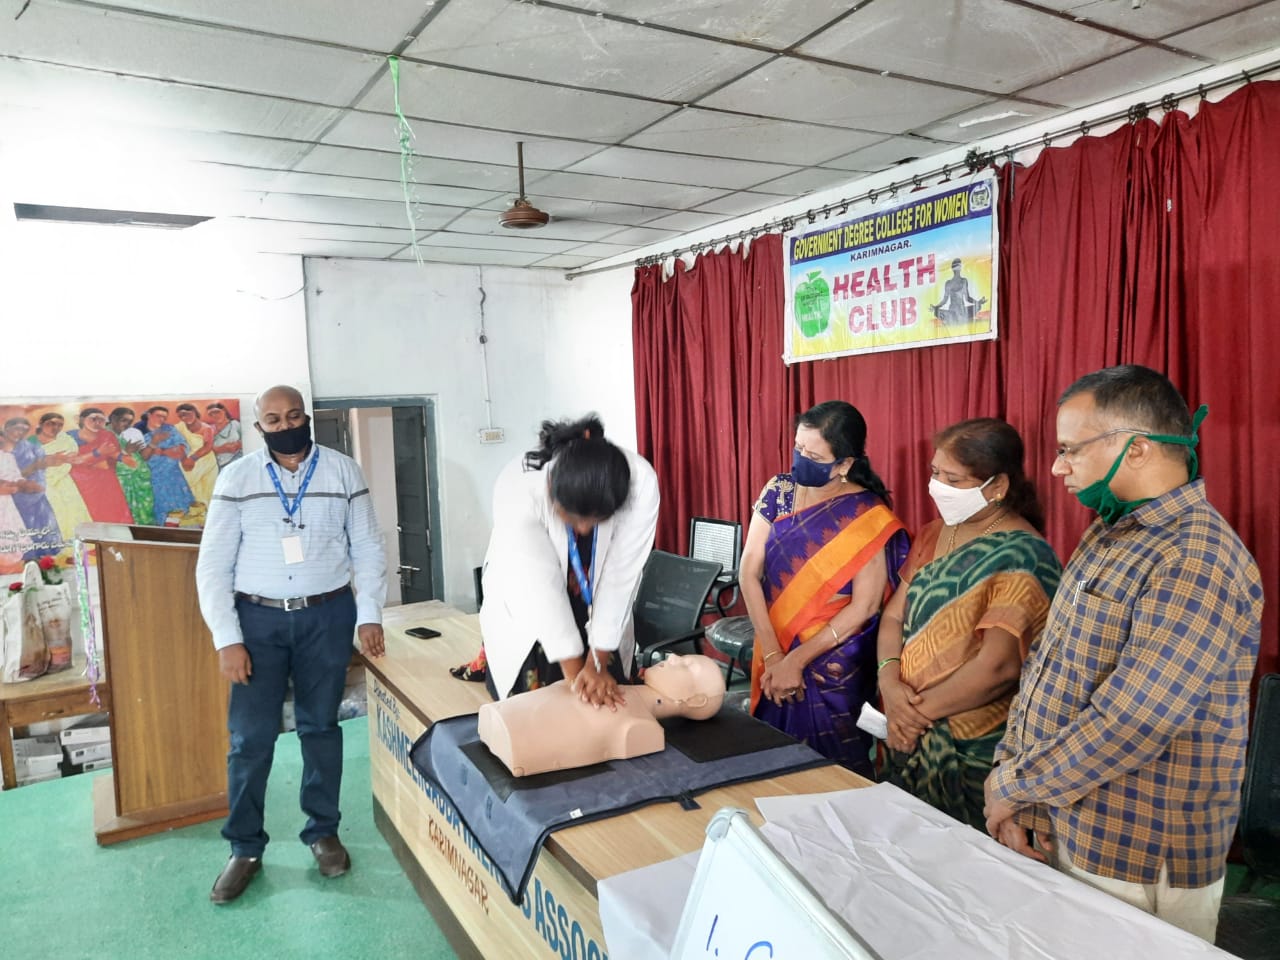 basic life support programme organized by WEC and health club